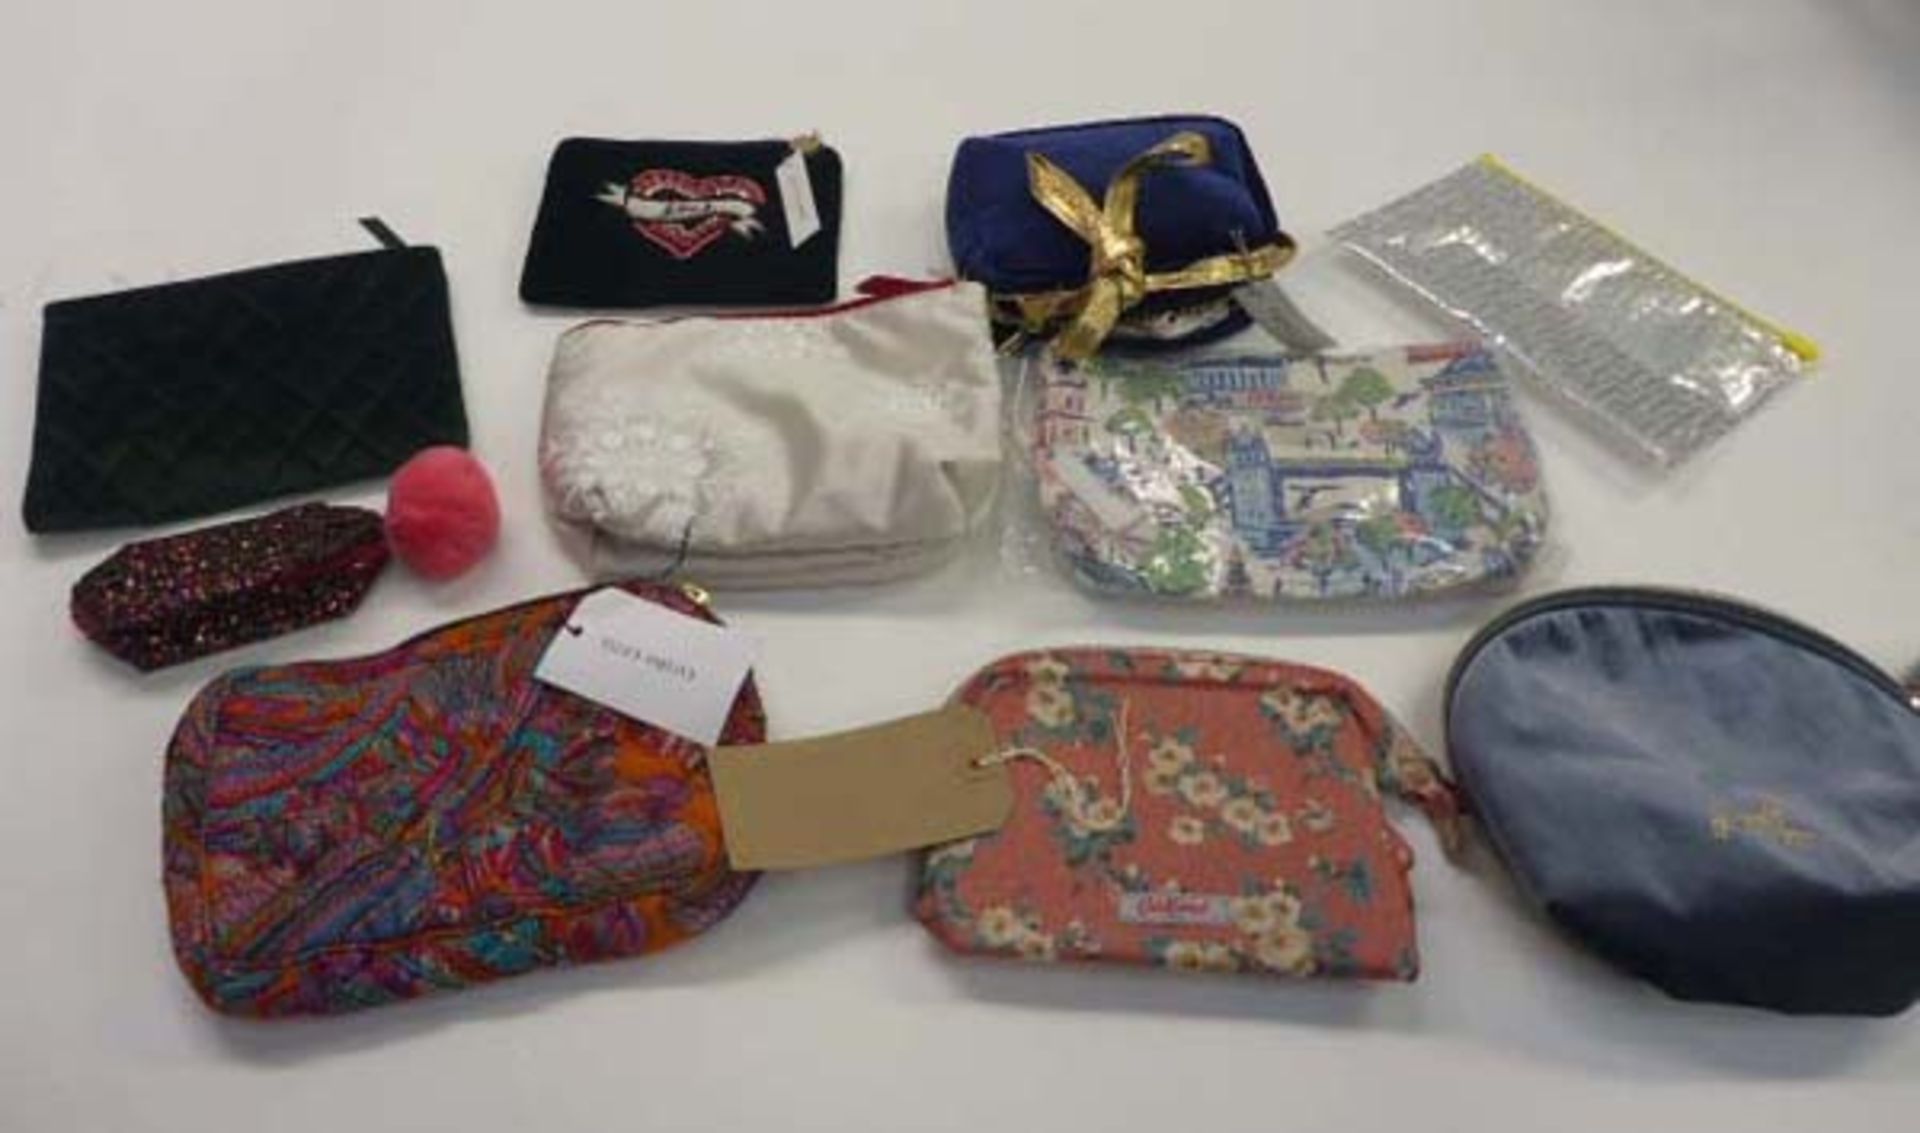 Selection of makeup bags including Cath Kidston, Ellies & Ivy, Birchwood, Clarins etc